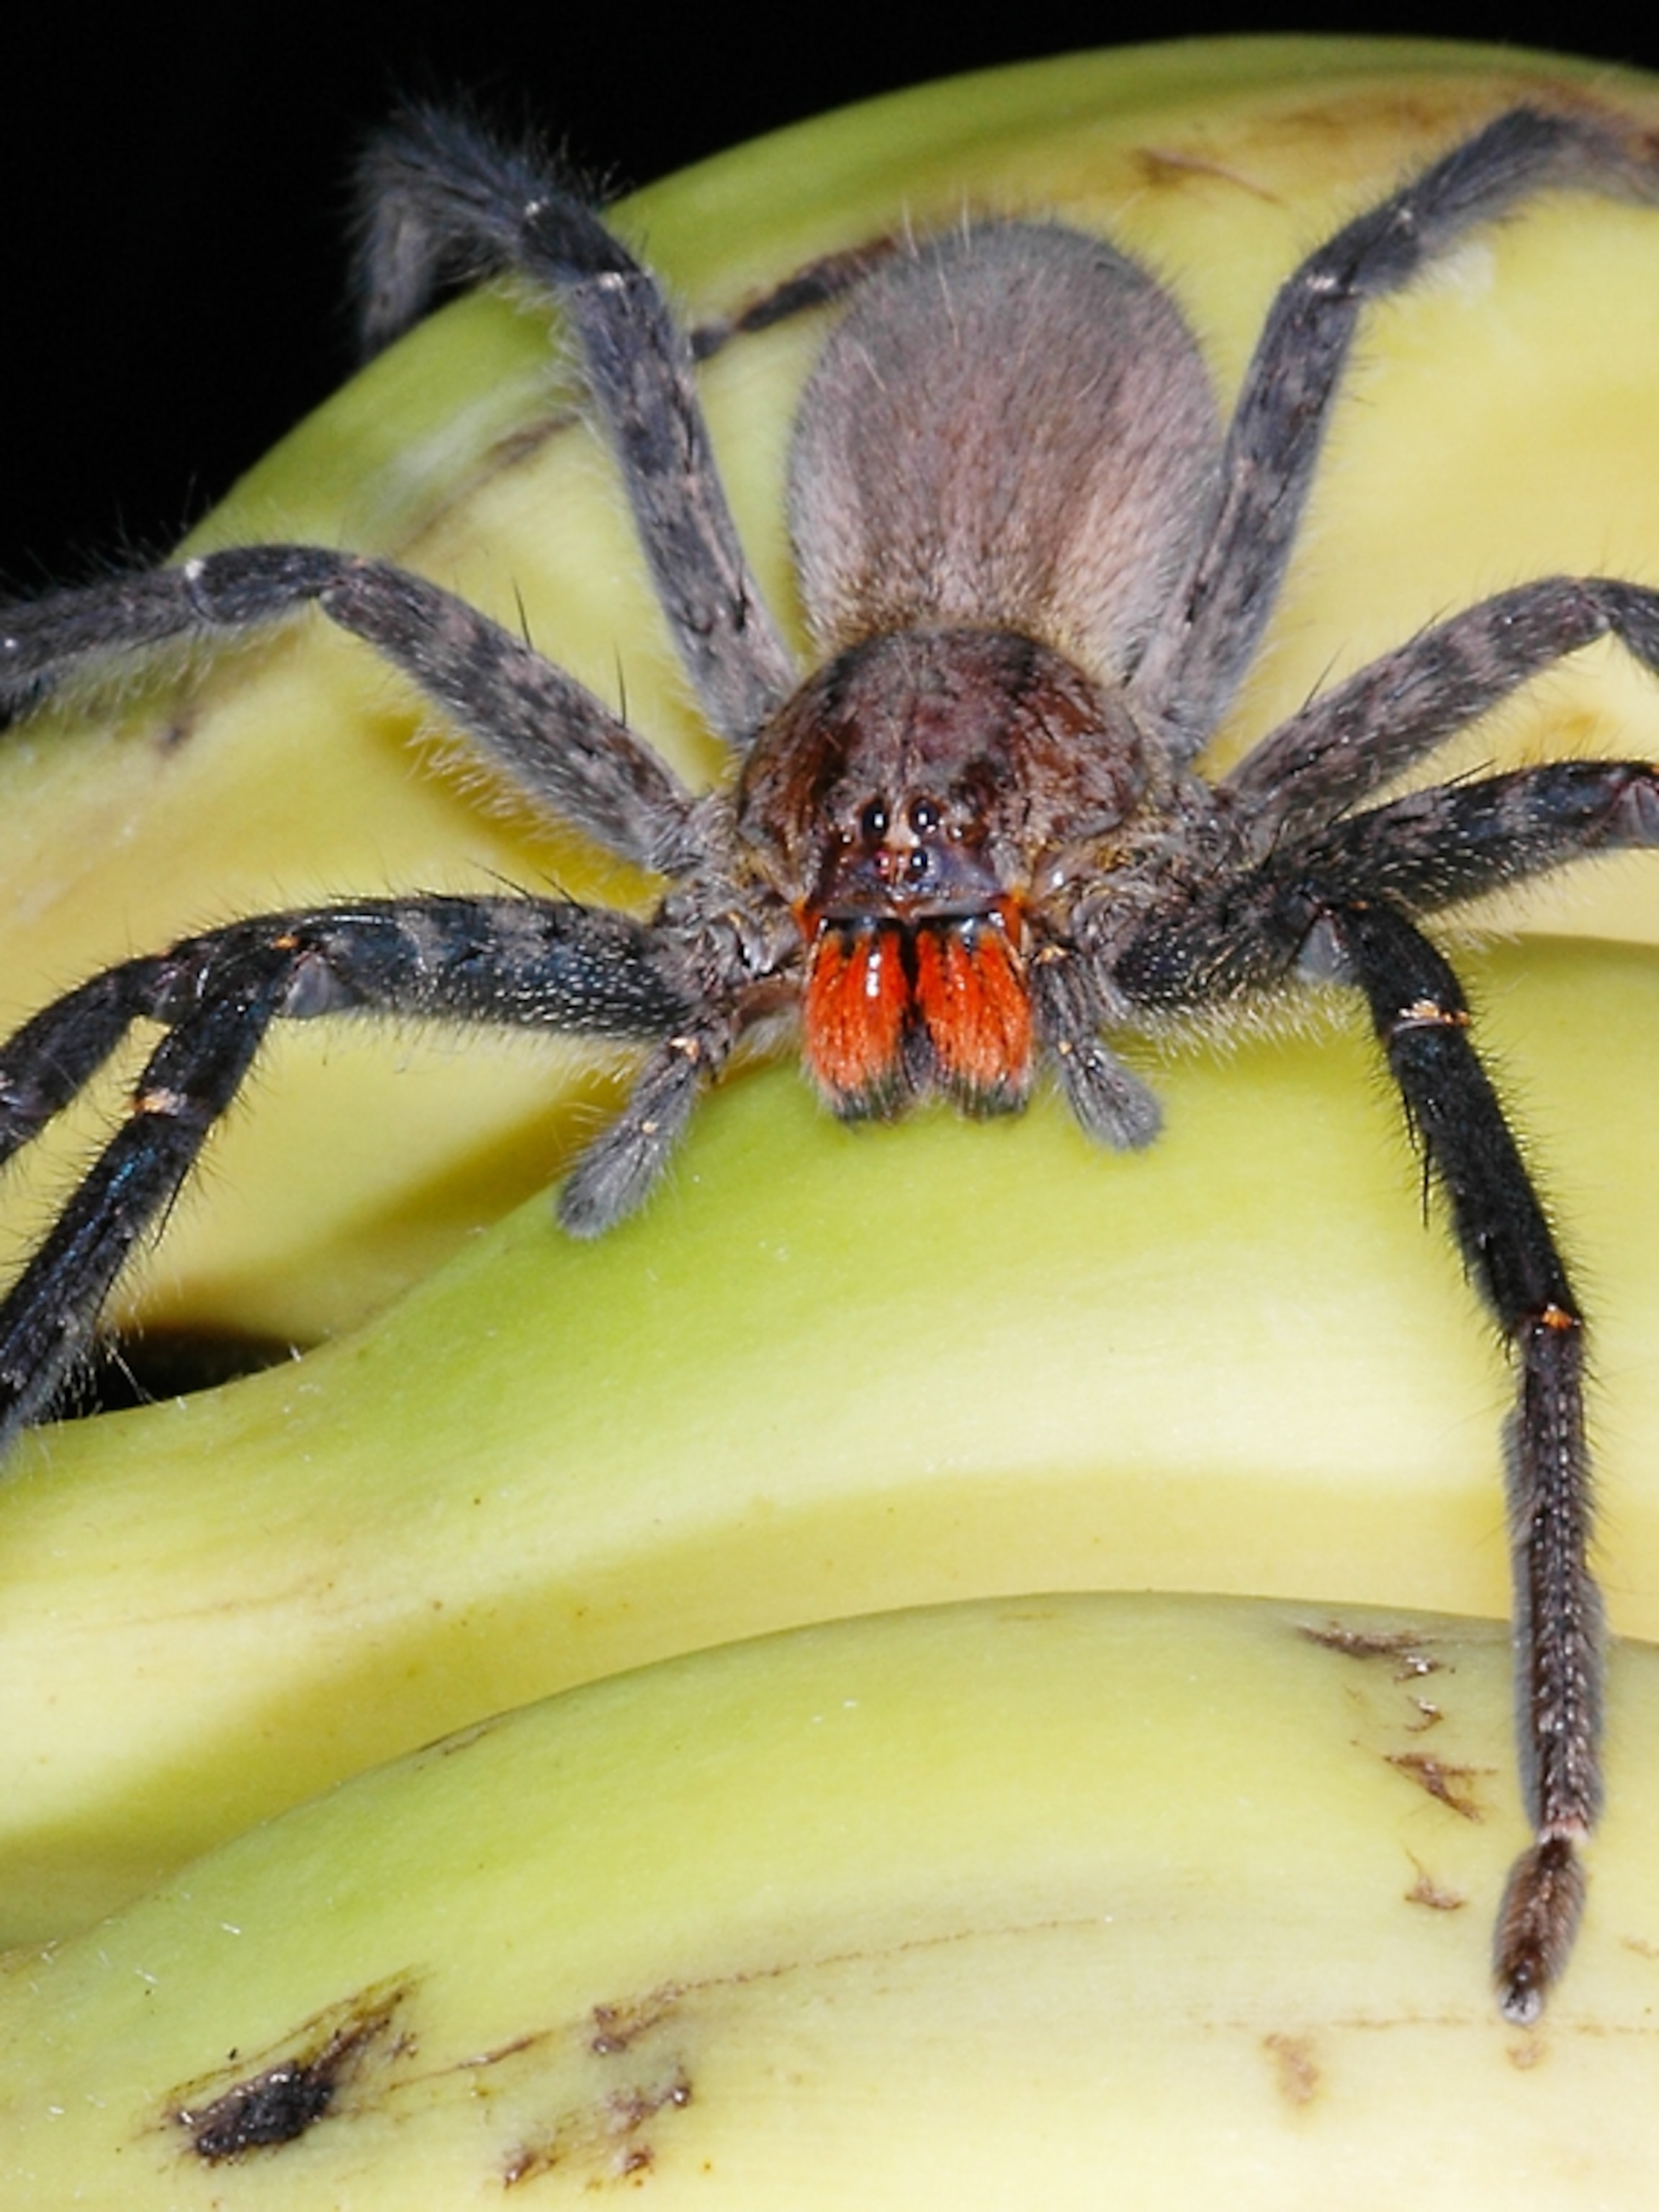 Occurrence Of Spiders In Bananas